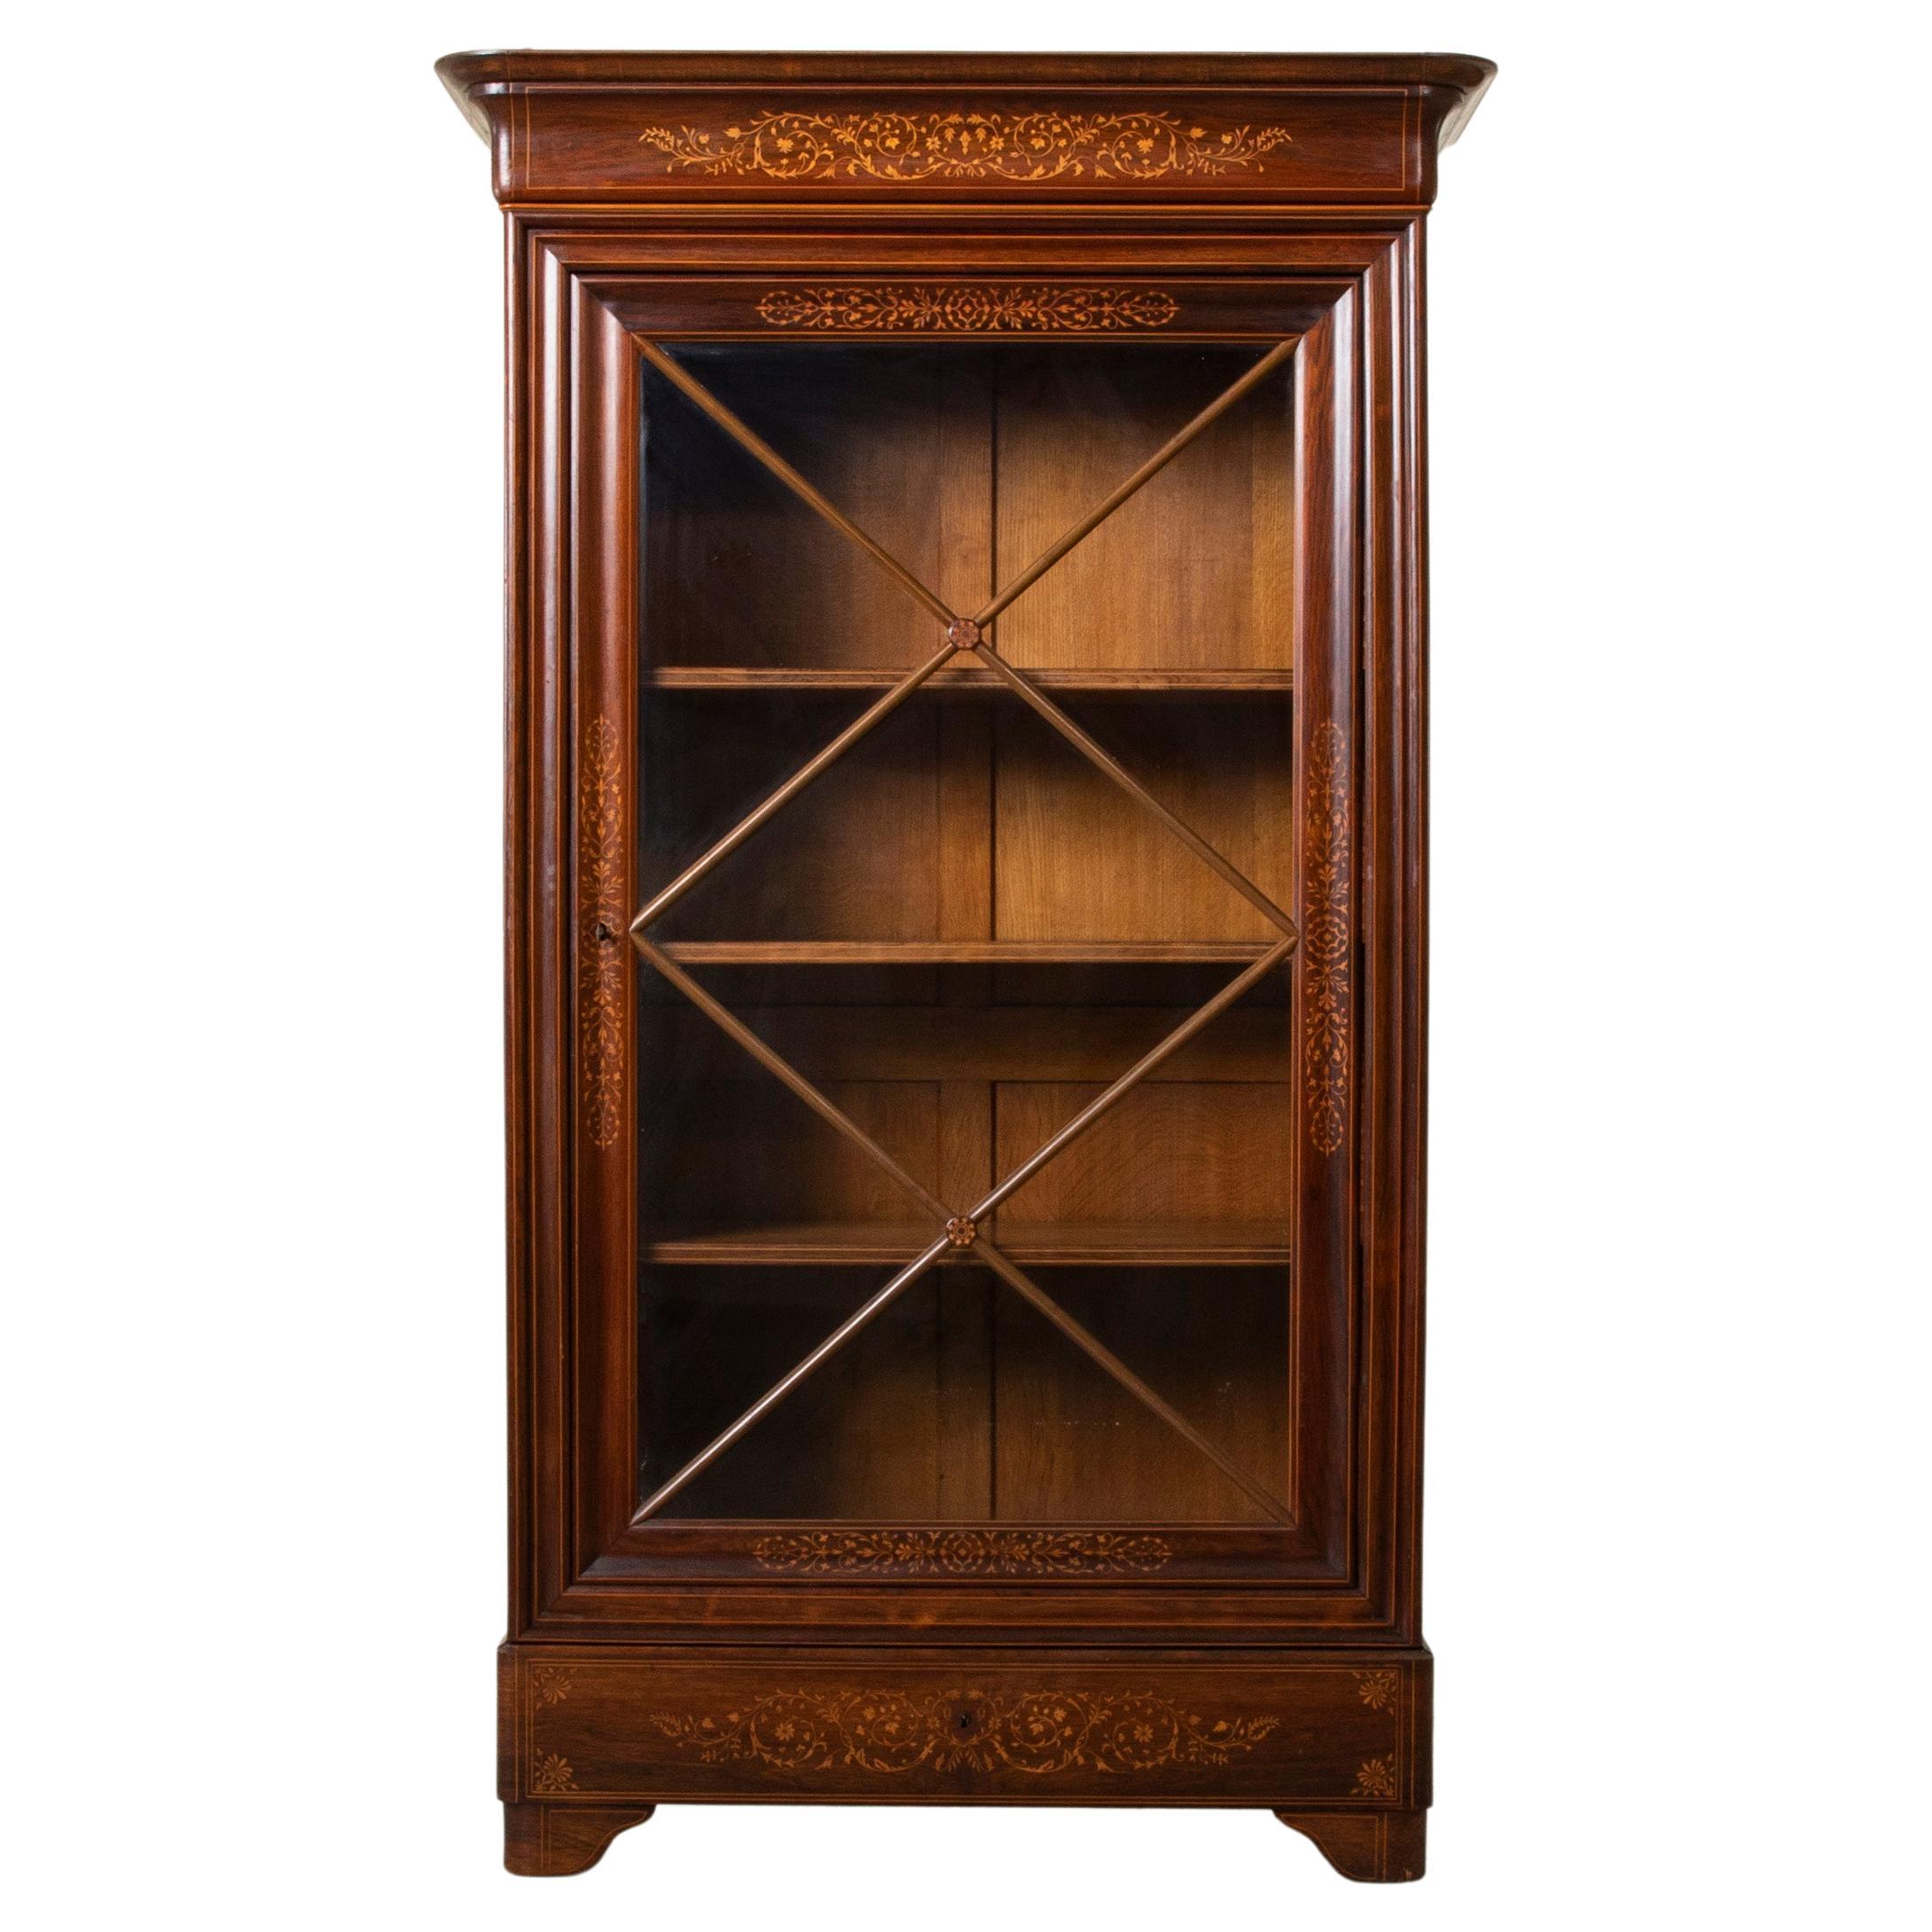 Early 19th Century French Charles X Period Mahogany Bookcase or Vitrine For Sale